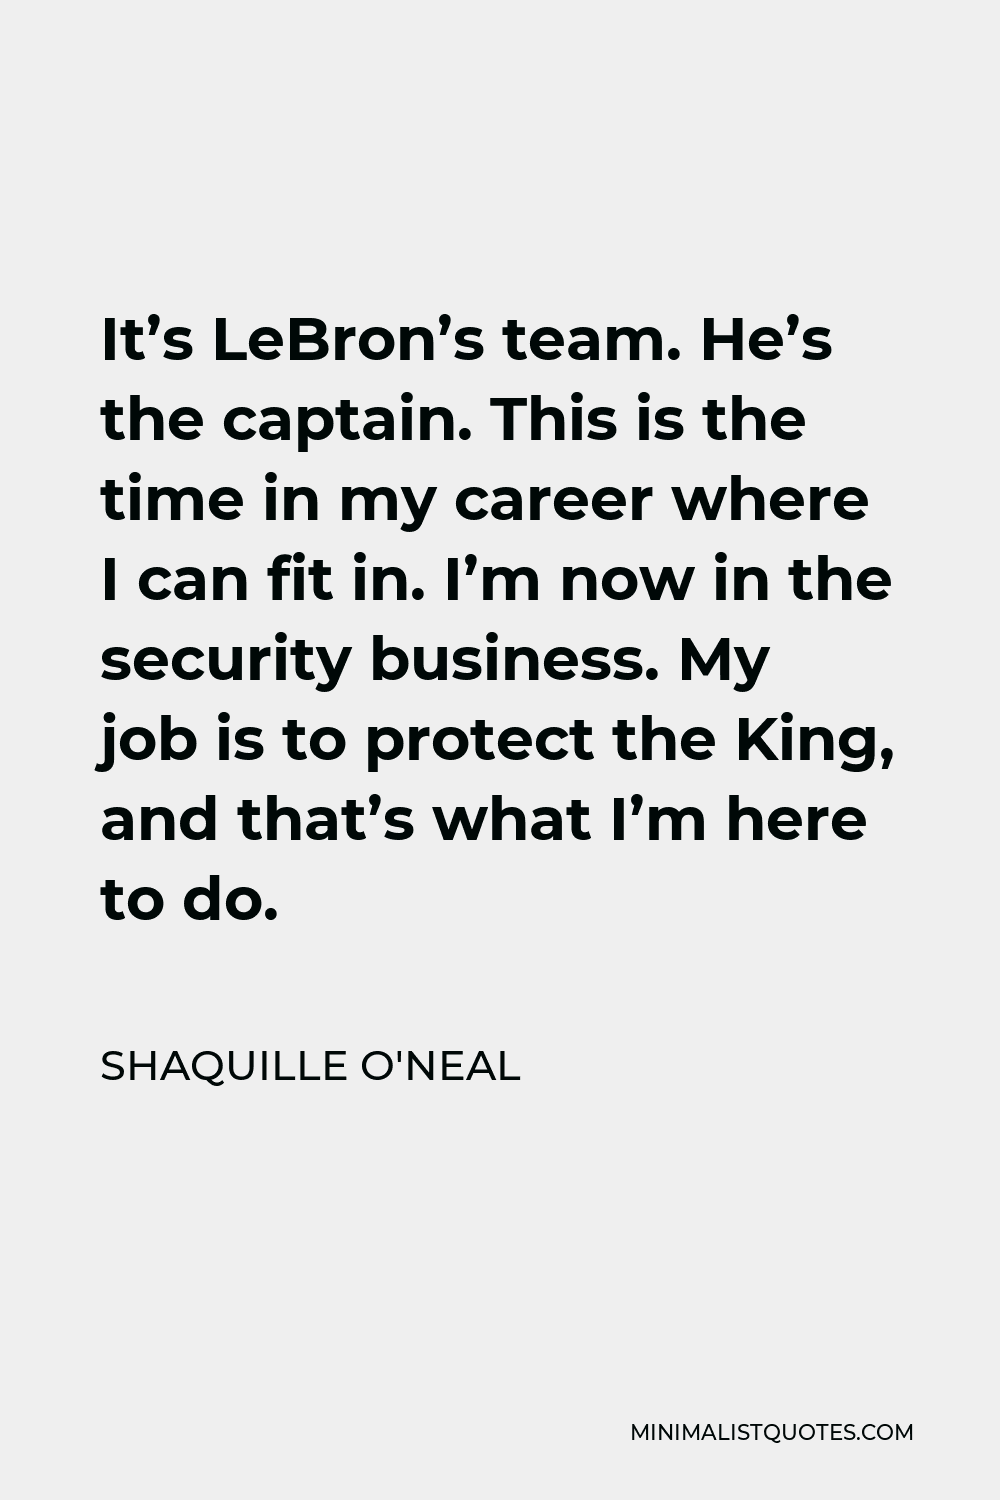 Shaquille O'Neal Quote - It’s LeBron’s team. He’s the captain. This is the time in my career where I can fit in. I’m now in the security business. My job is to protect the King, and that’s what I’m here to do.